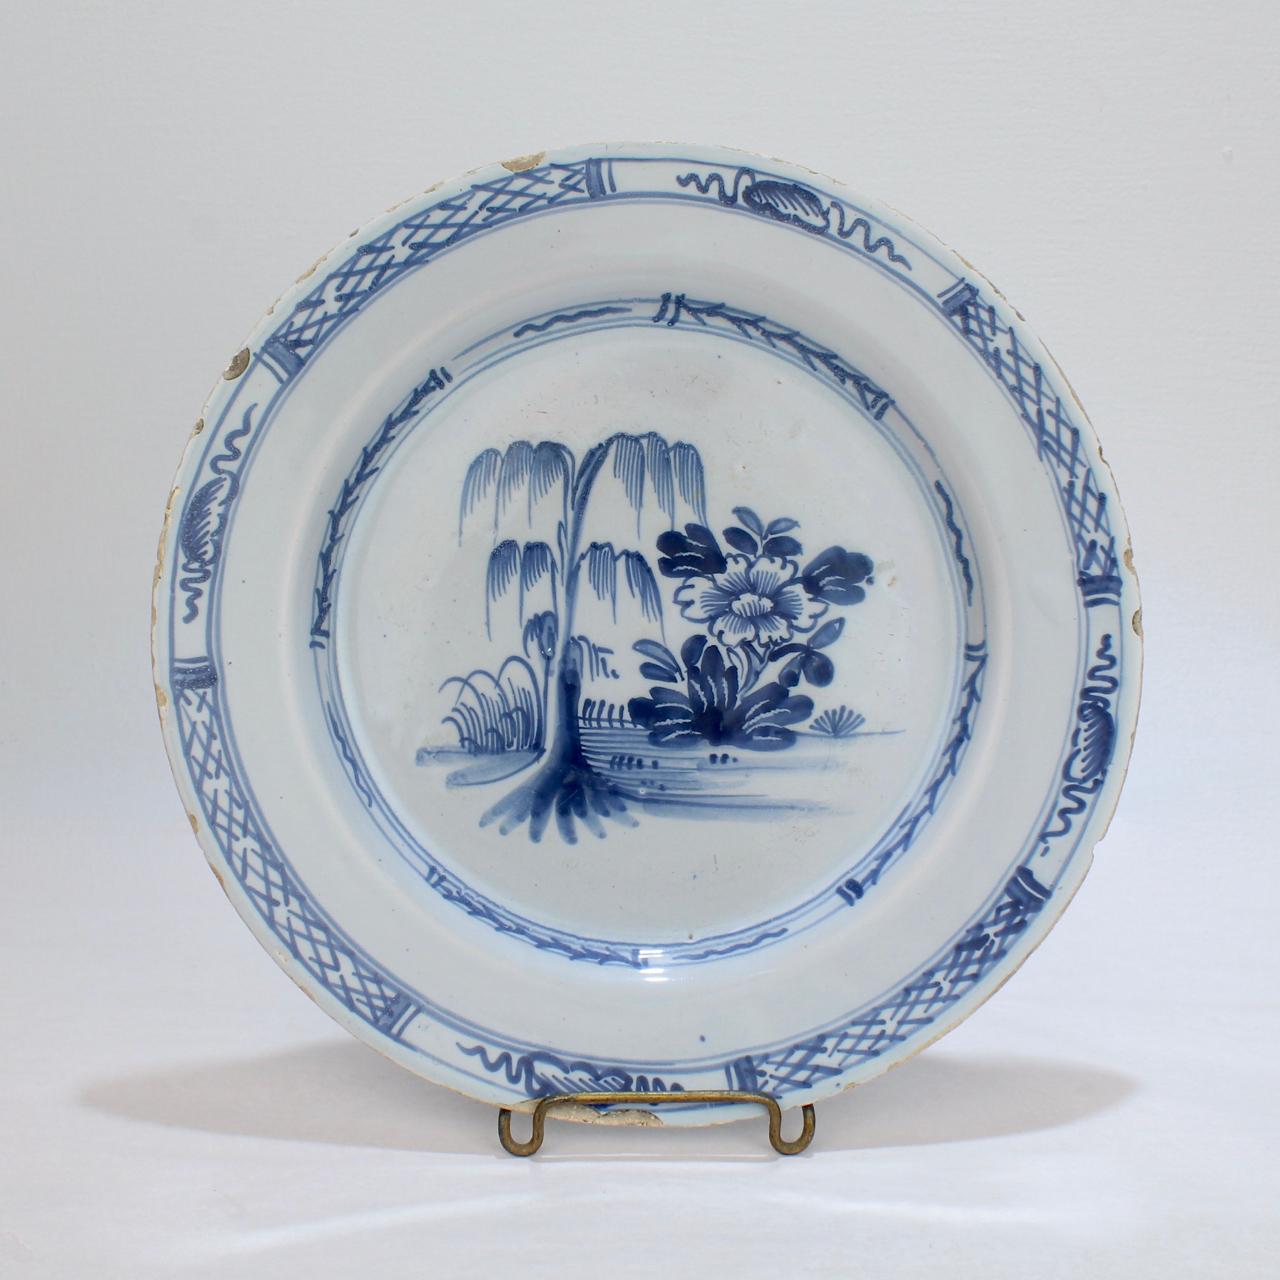 A fine English Delft plate.

Depicting a willow tree and a lotus bush side-by-side.

In the Chinoiserie style.

Simply a wonderful plate!

Date:
Mid-18th century

Overall condition
It is in overall good, as-pictured, used estate condition. There is